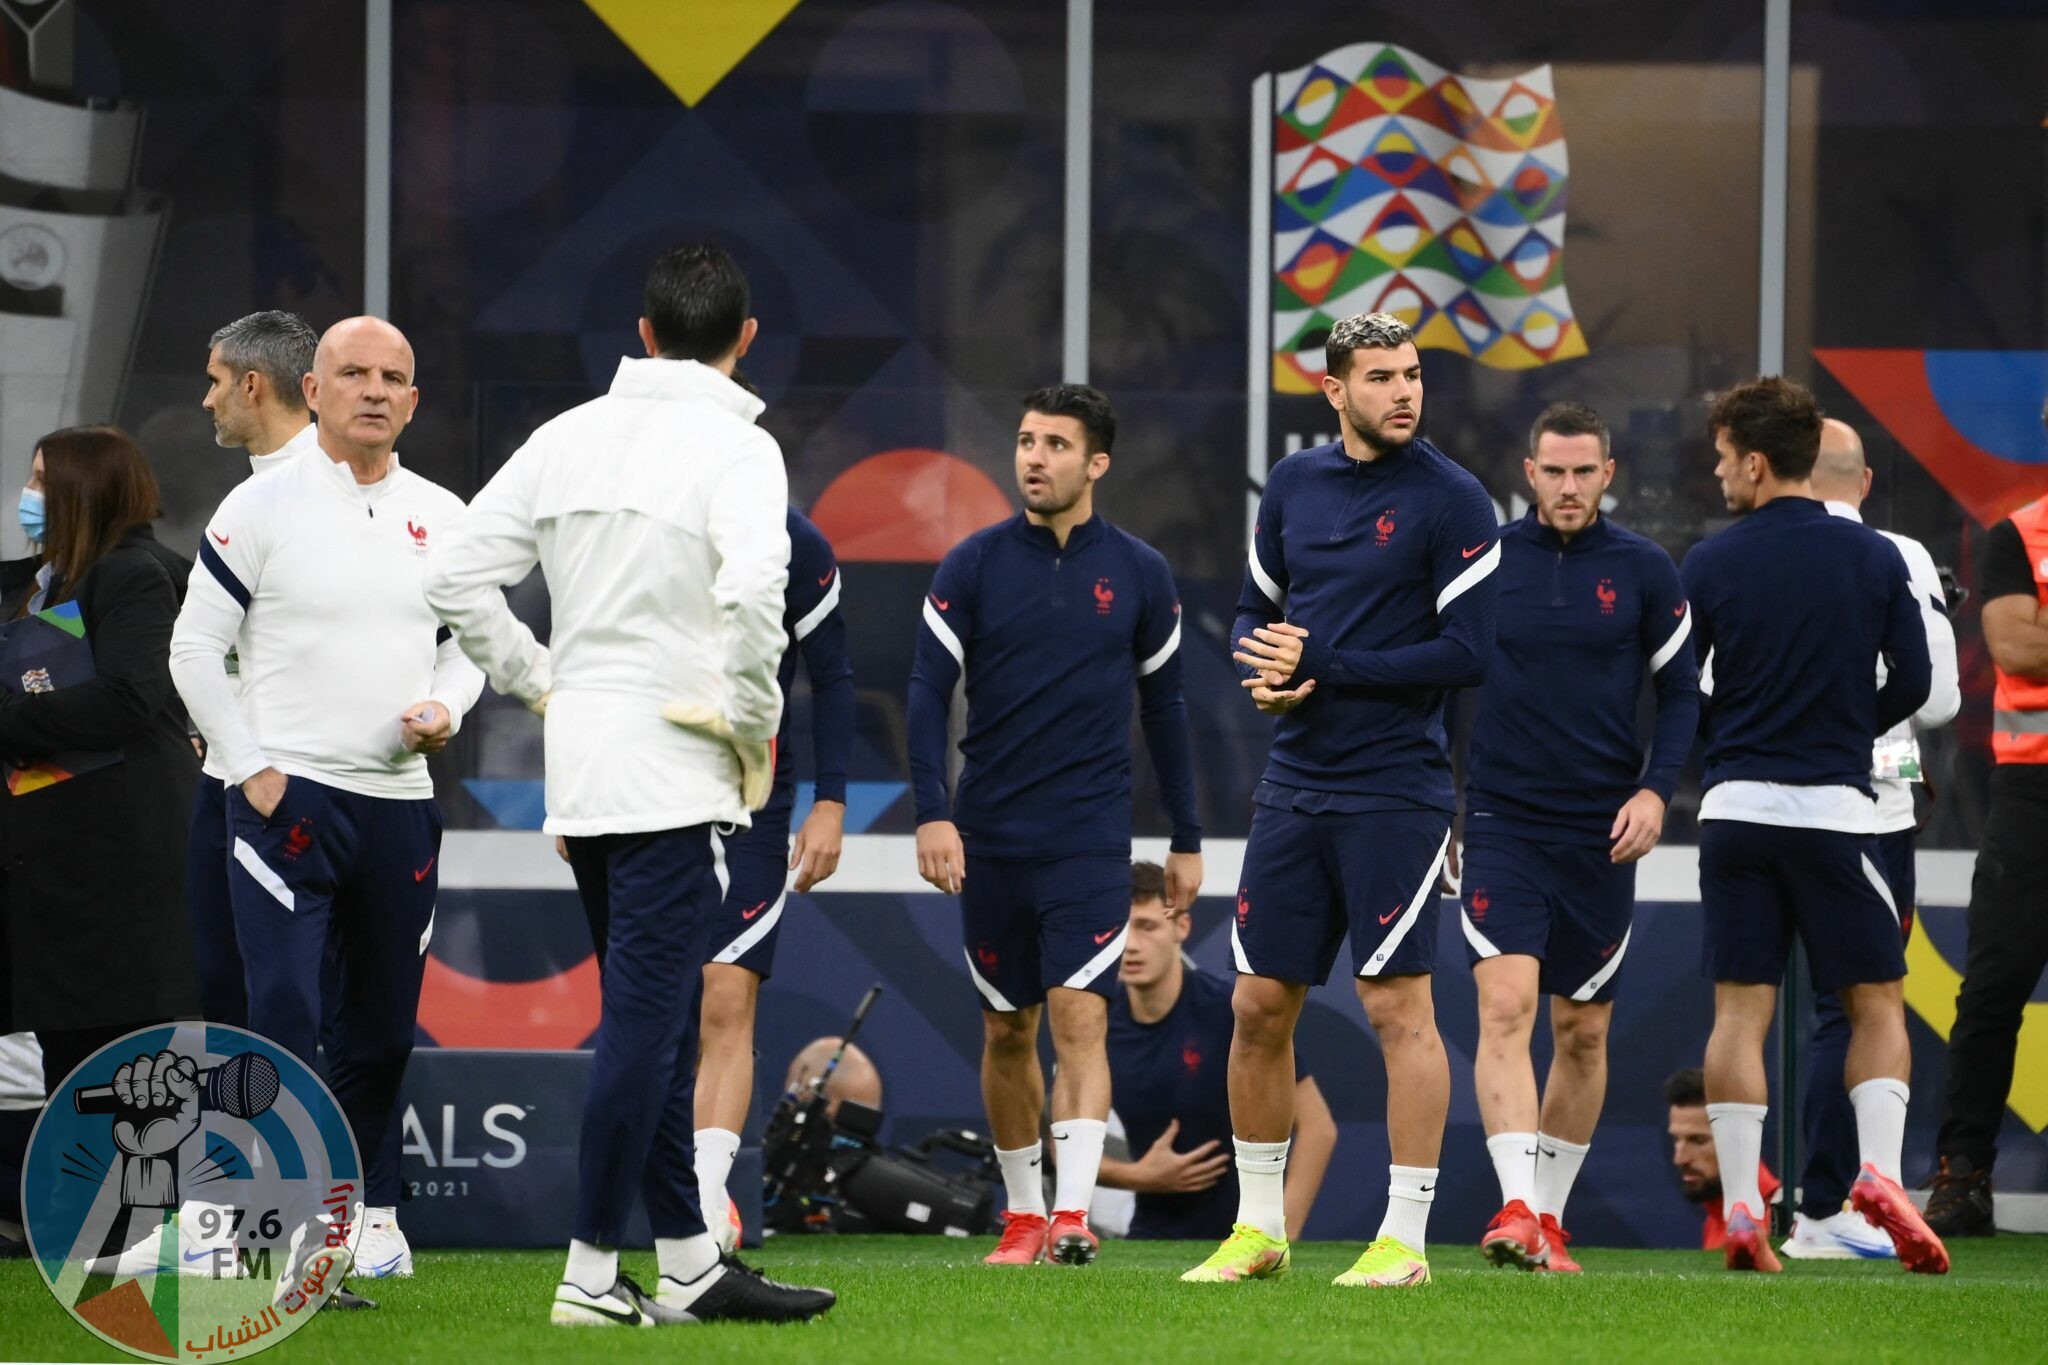 France's assistant coach Guy Stephan (L), France's defender Leo Dubois (C) and France's defender Lucas Hernandez (R) arrive for a training session at the San Siro Stadium in Milan on October 9, 2021, on the eve of the UEFA Nations League final football match between Spain and France. (Photo by FRANCK FIFE / AFP)